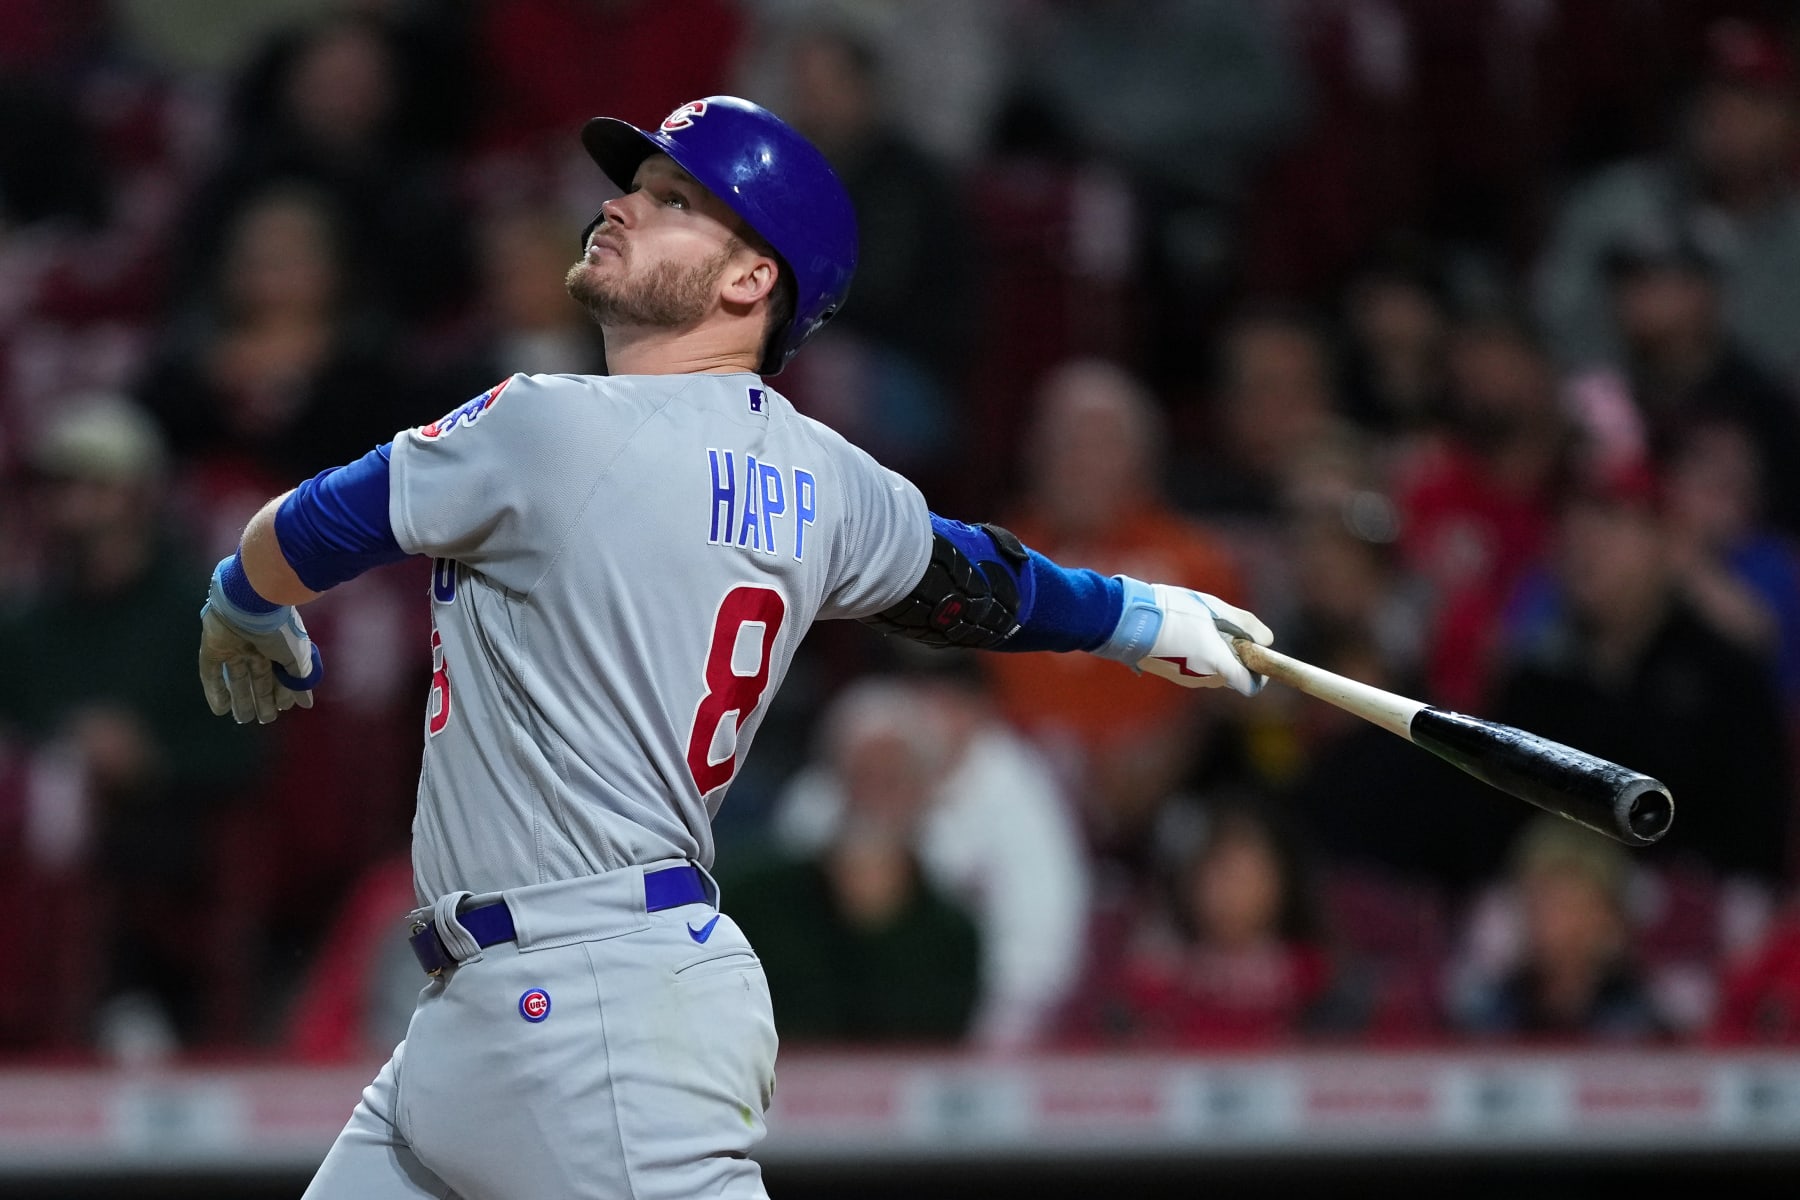 Feinsand: Ian Happ is Cubs' 'Best Trade Chip, Likely to Start 2023 in New  Uniform' - Fastball